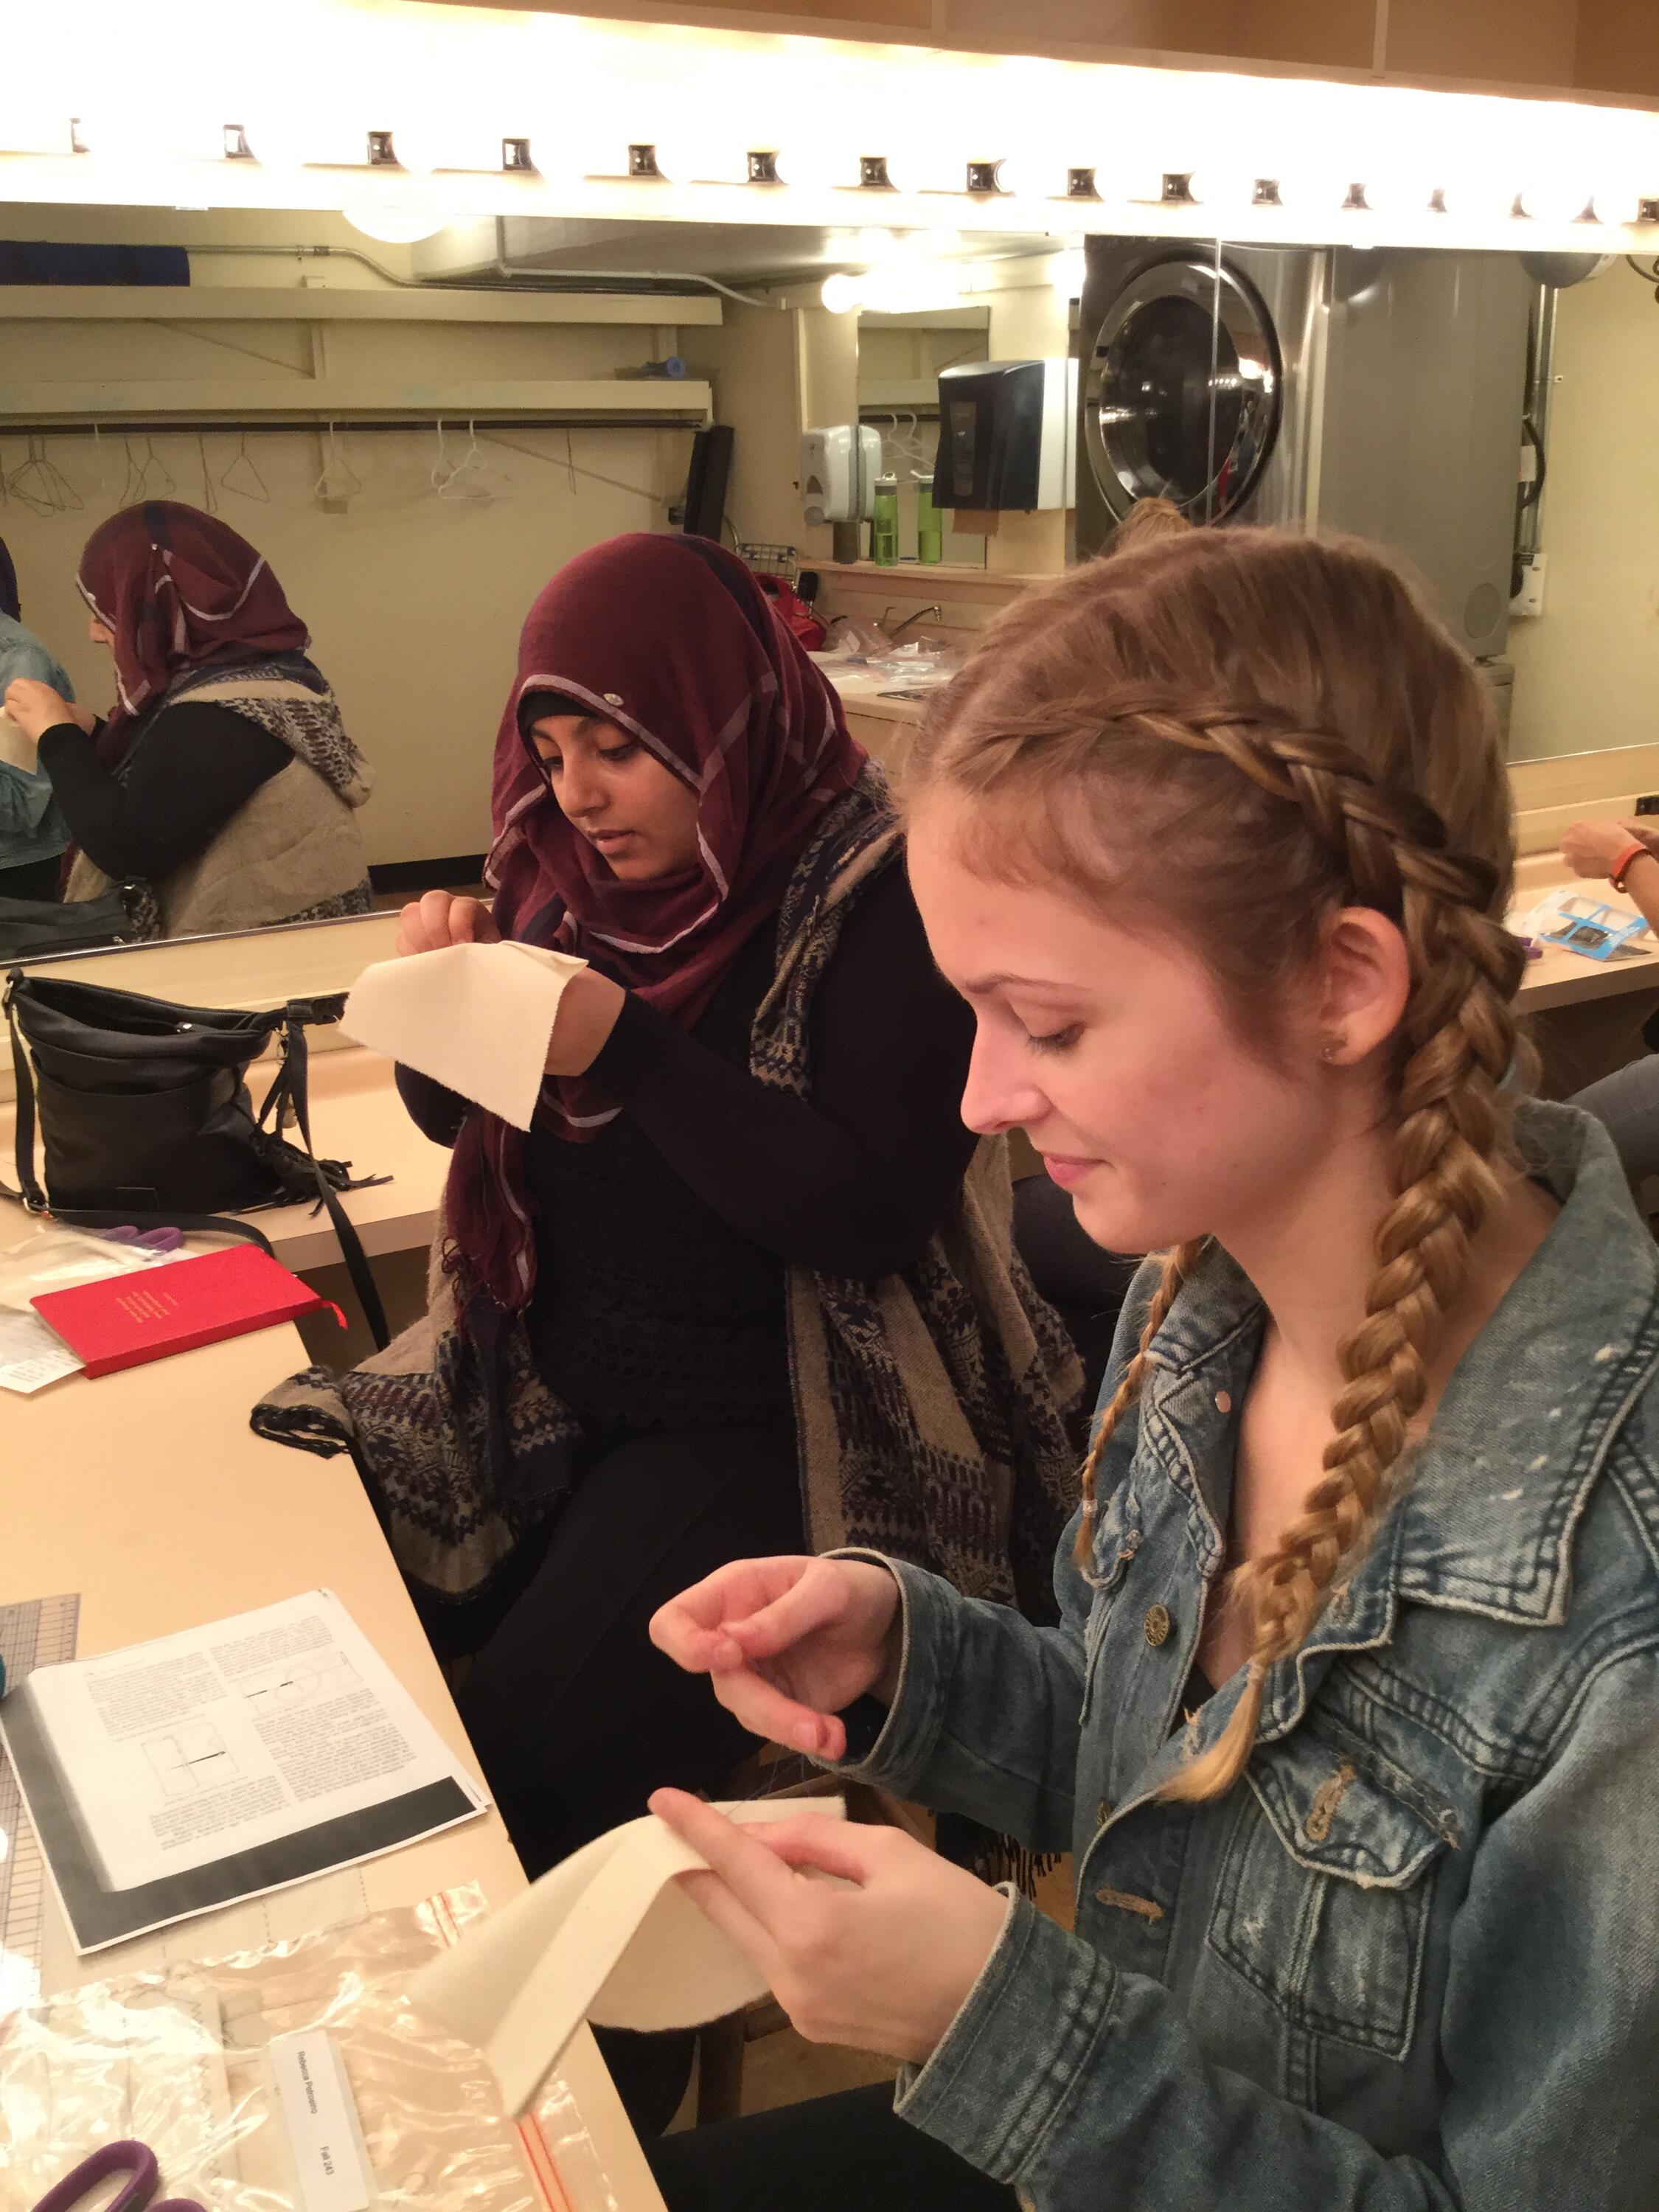 Two students sewing in a workshop